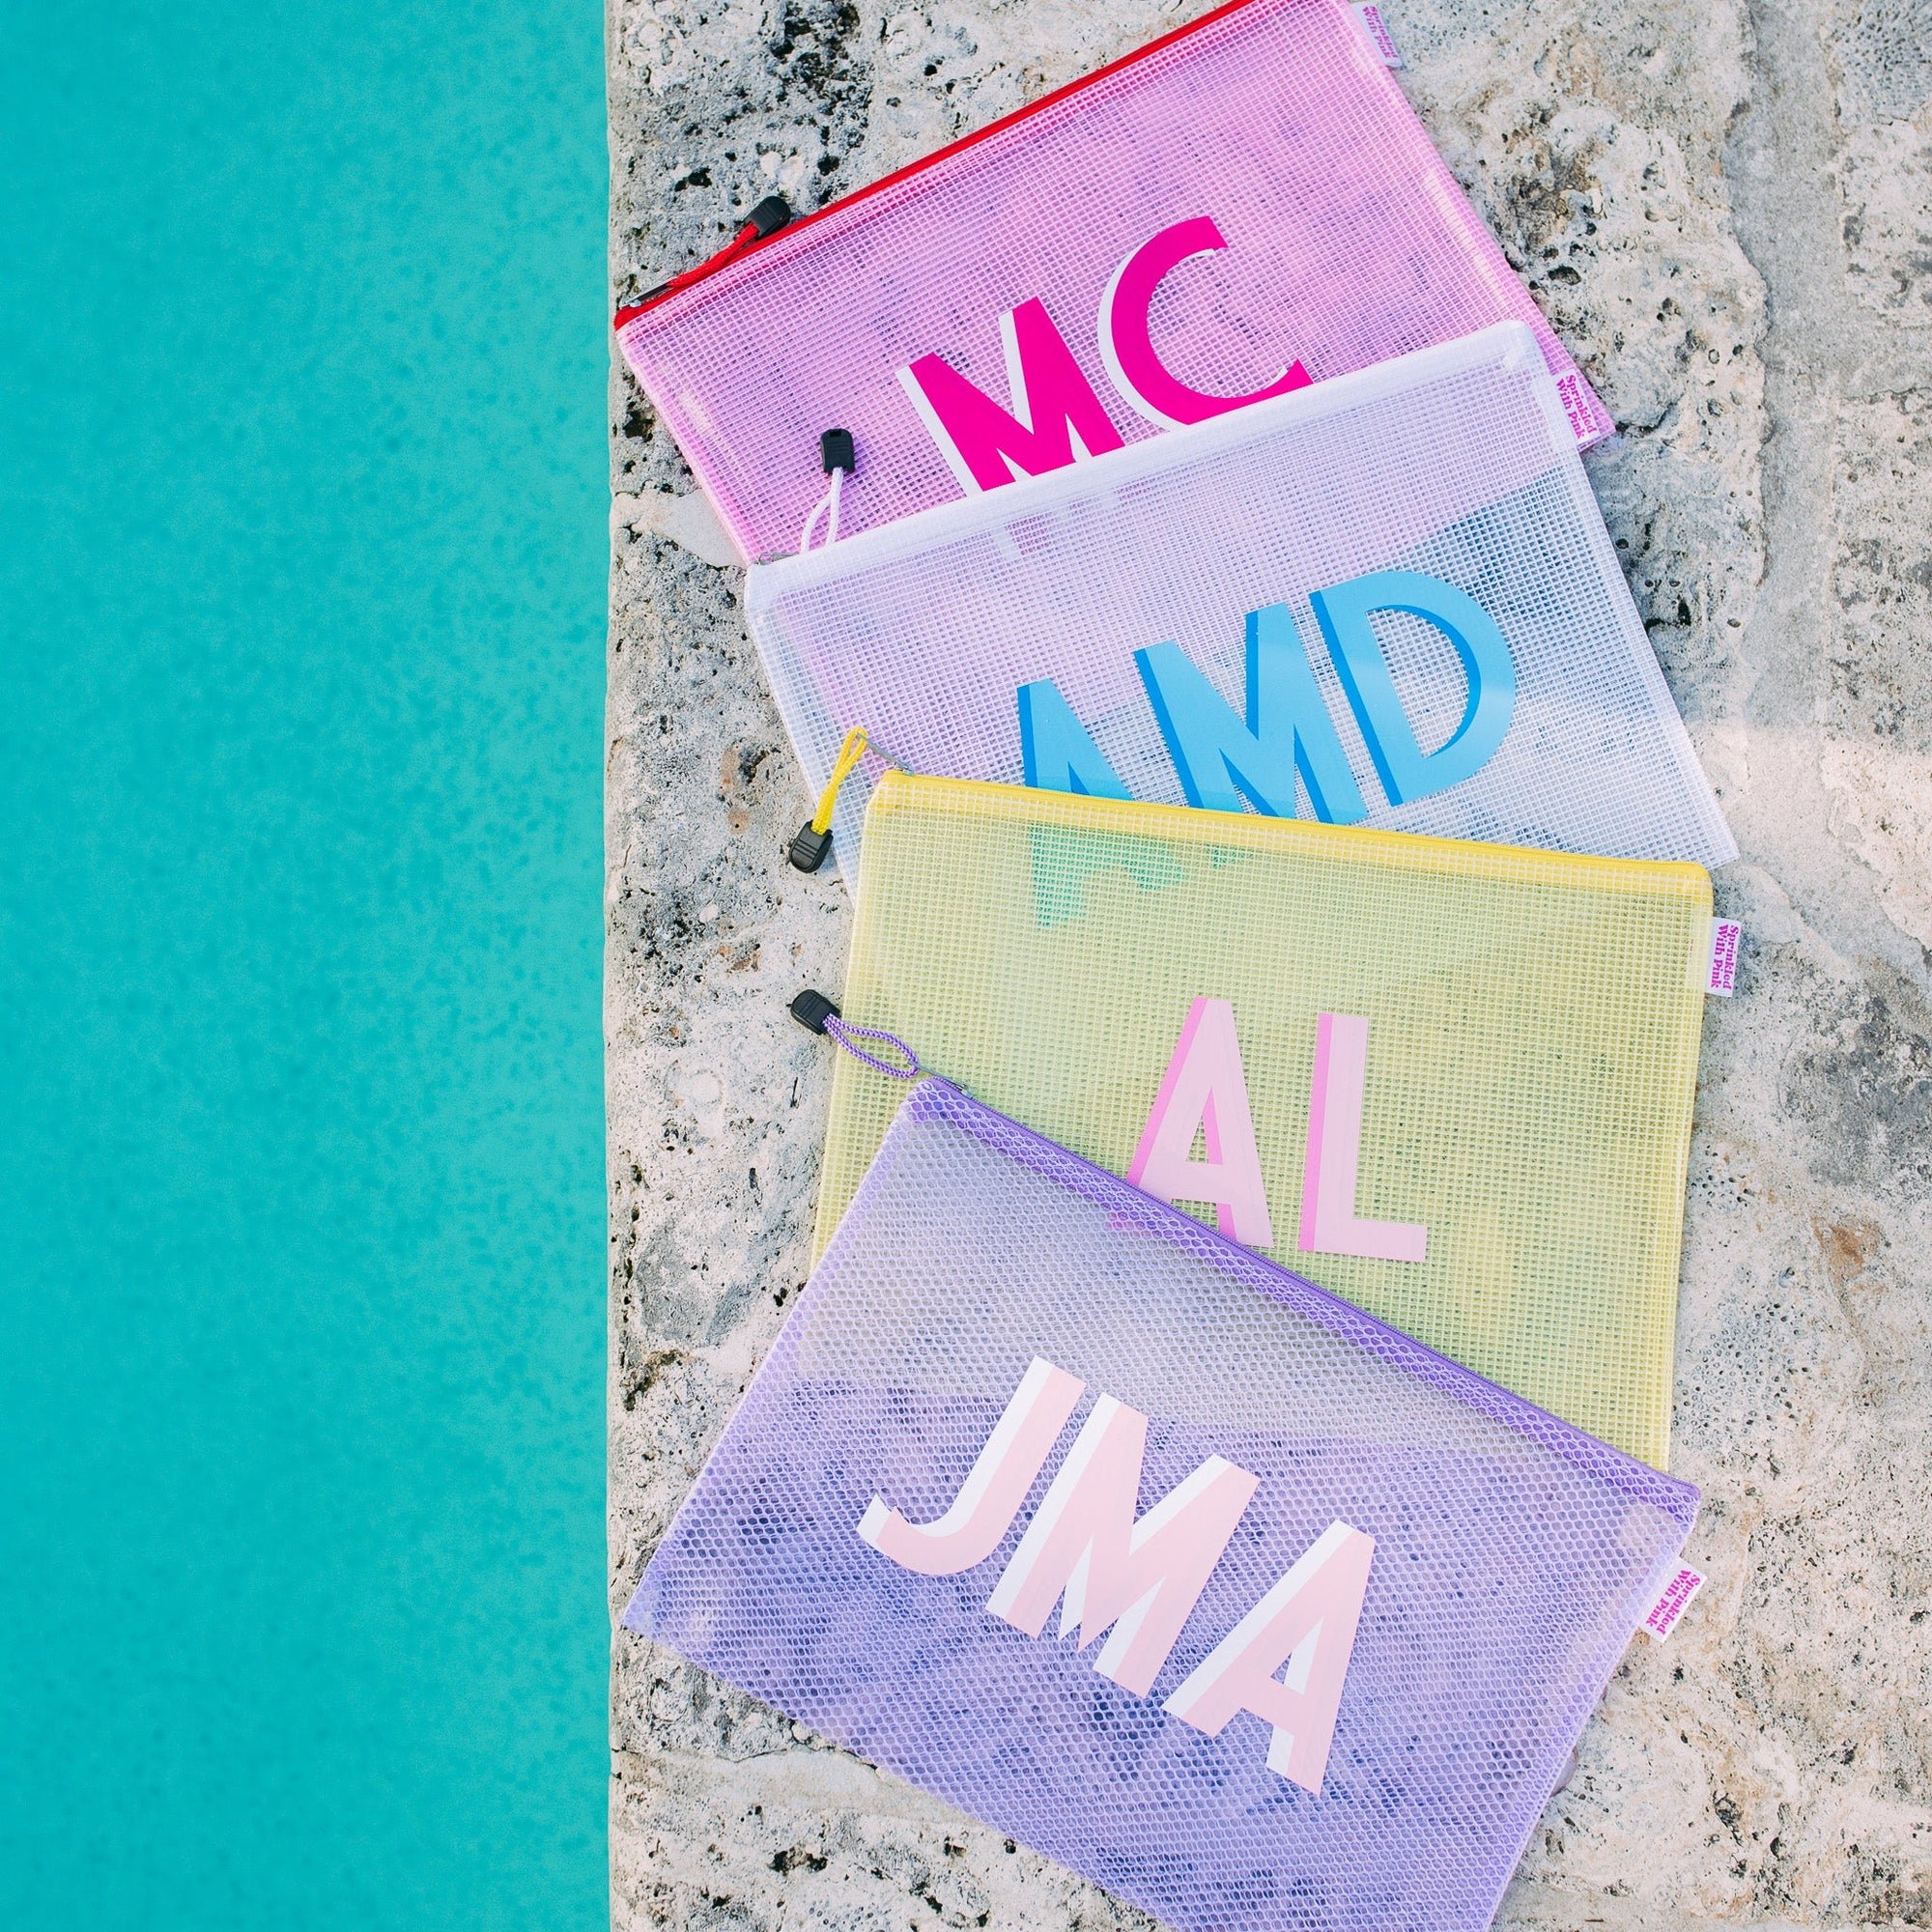 A group of pool bags with colorful zippers are monogrammed with bright colors.